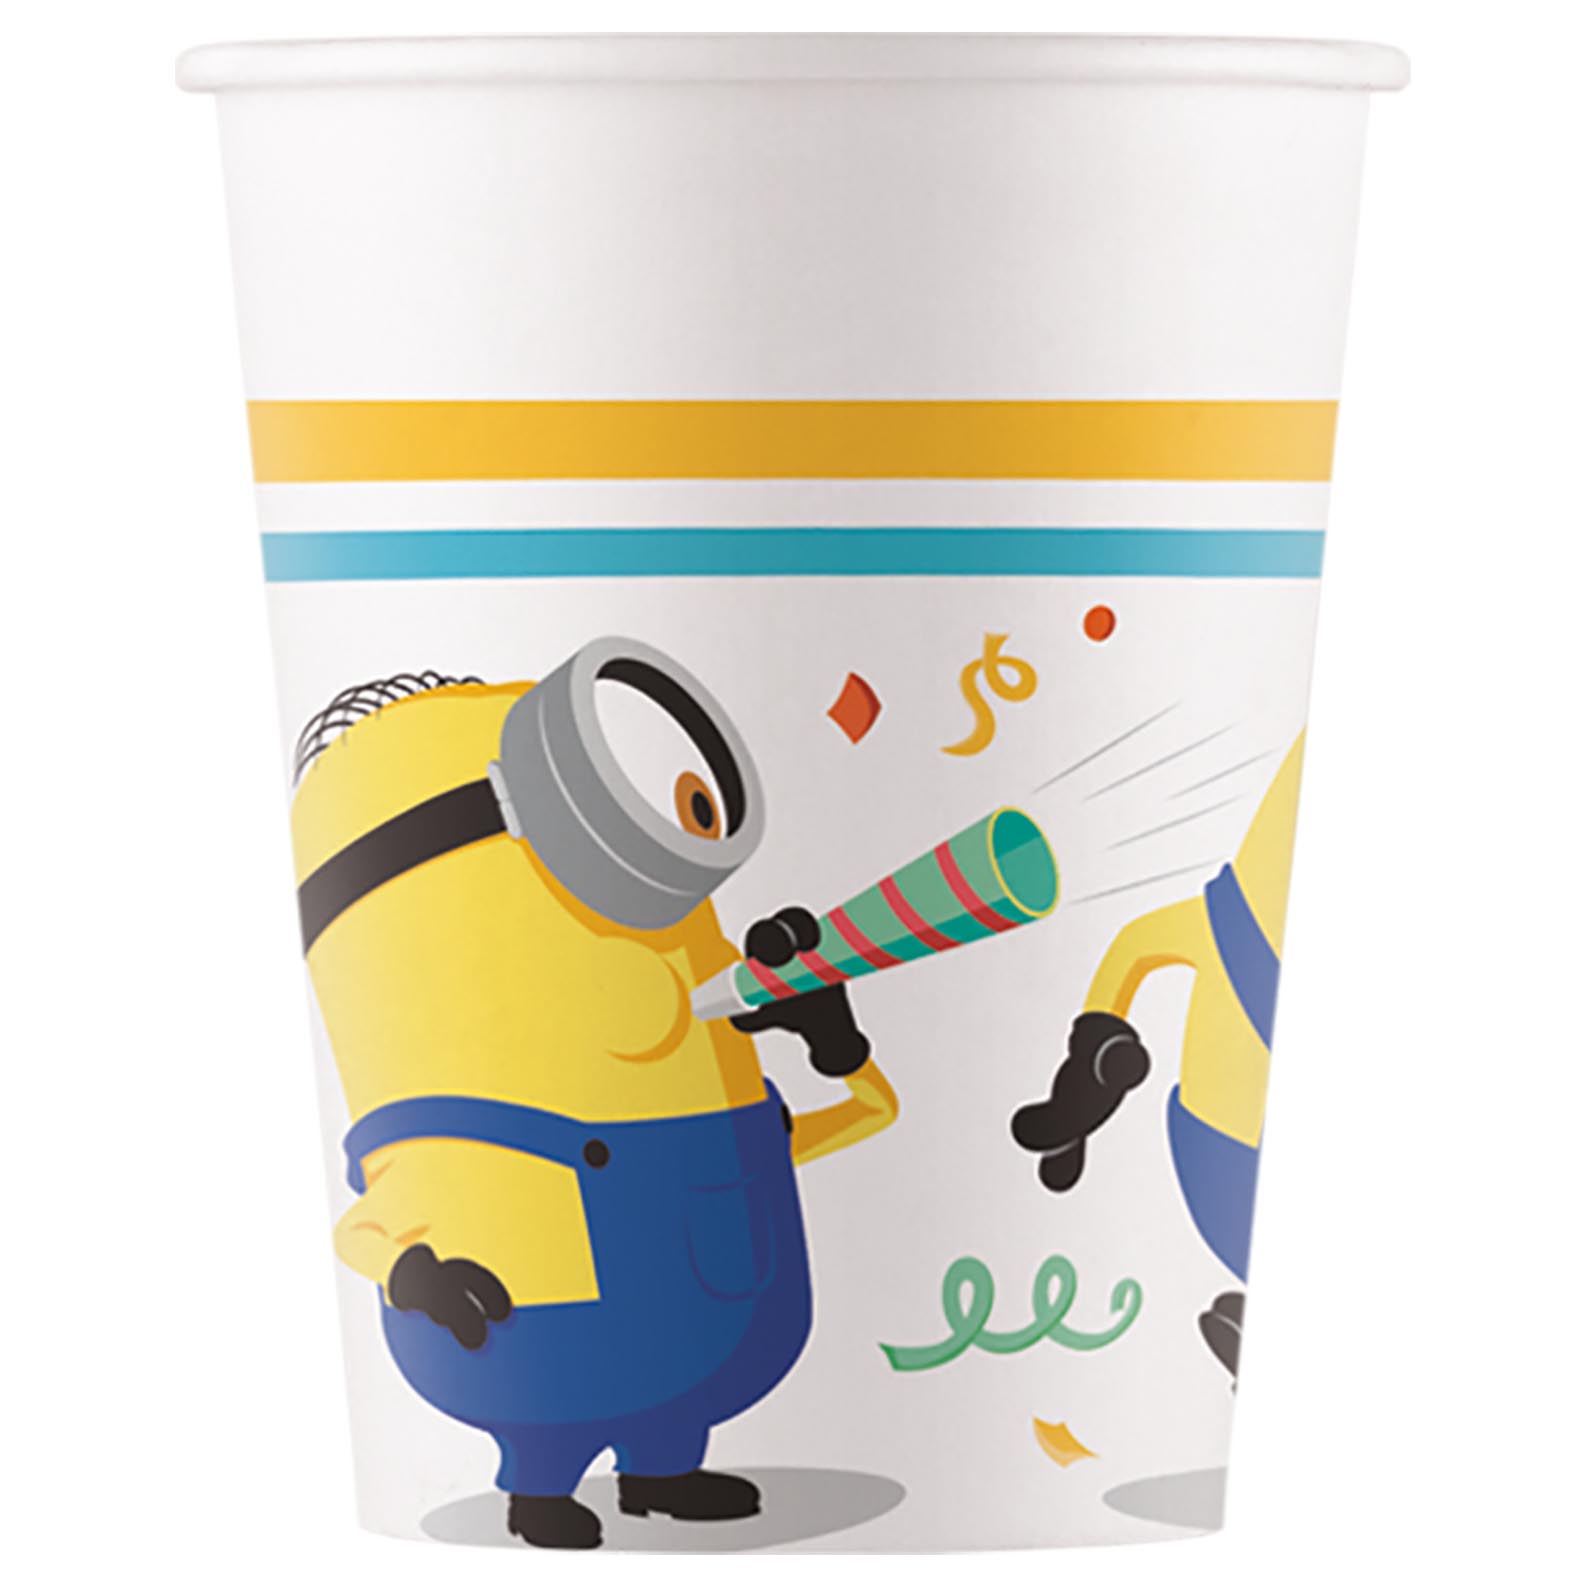 Minions: The Rise of Gru Party Tableware & Decorations Bundle - 16 Guests